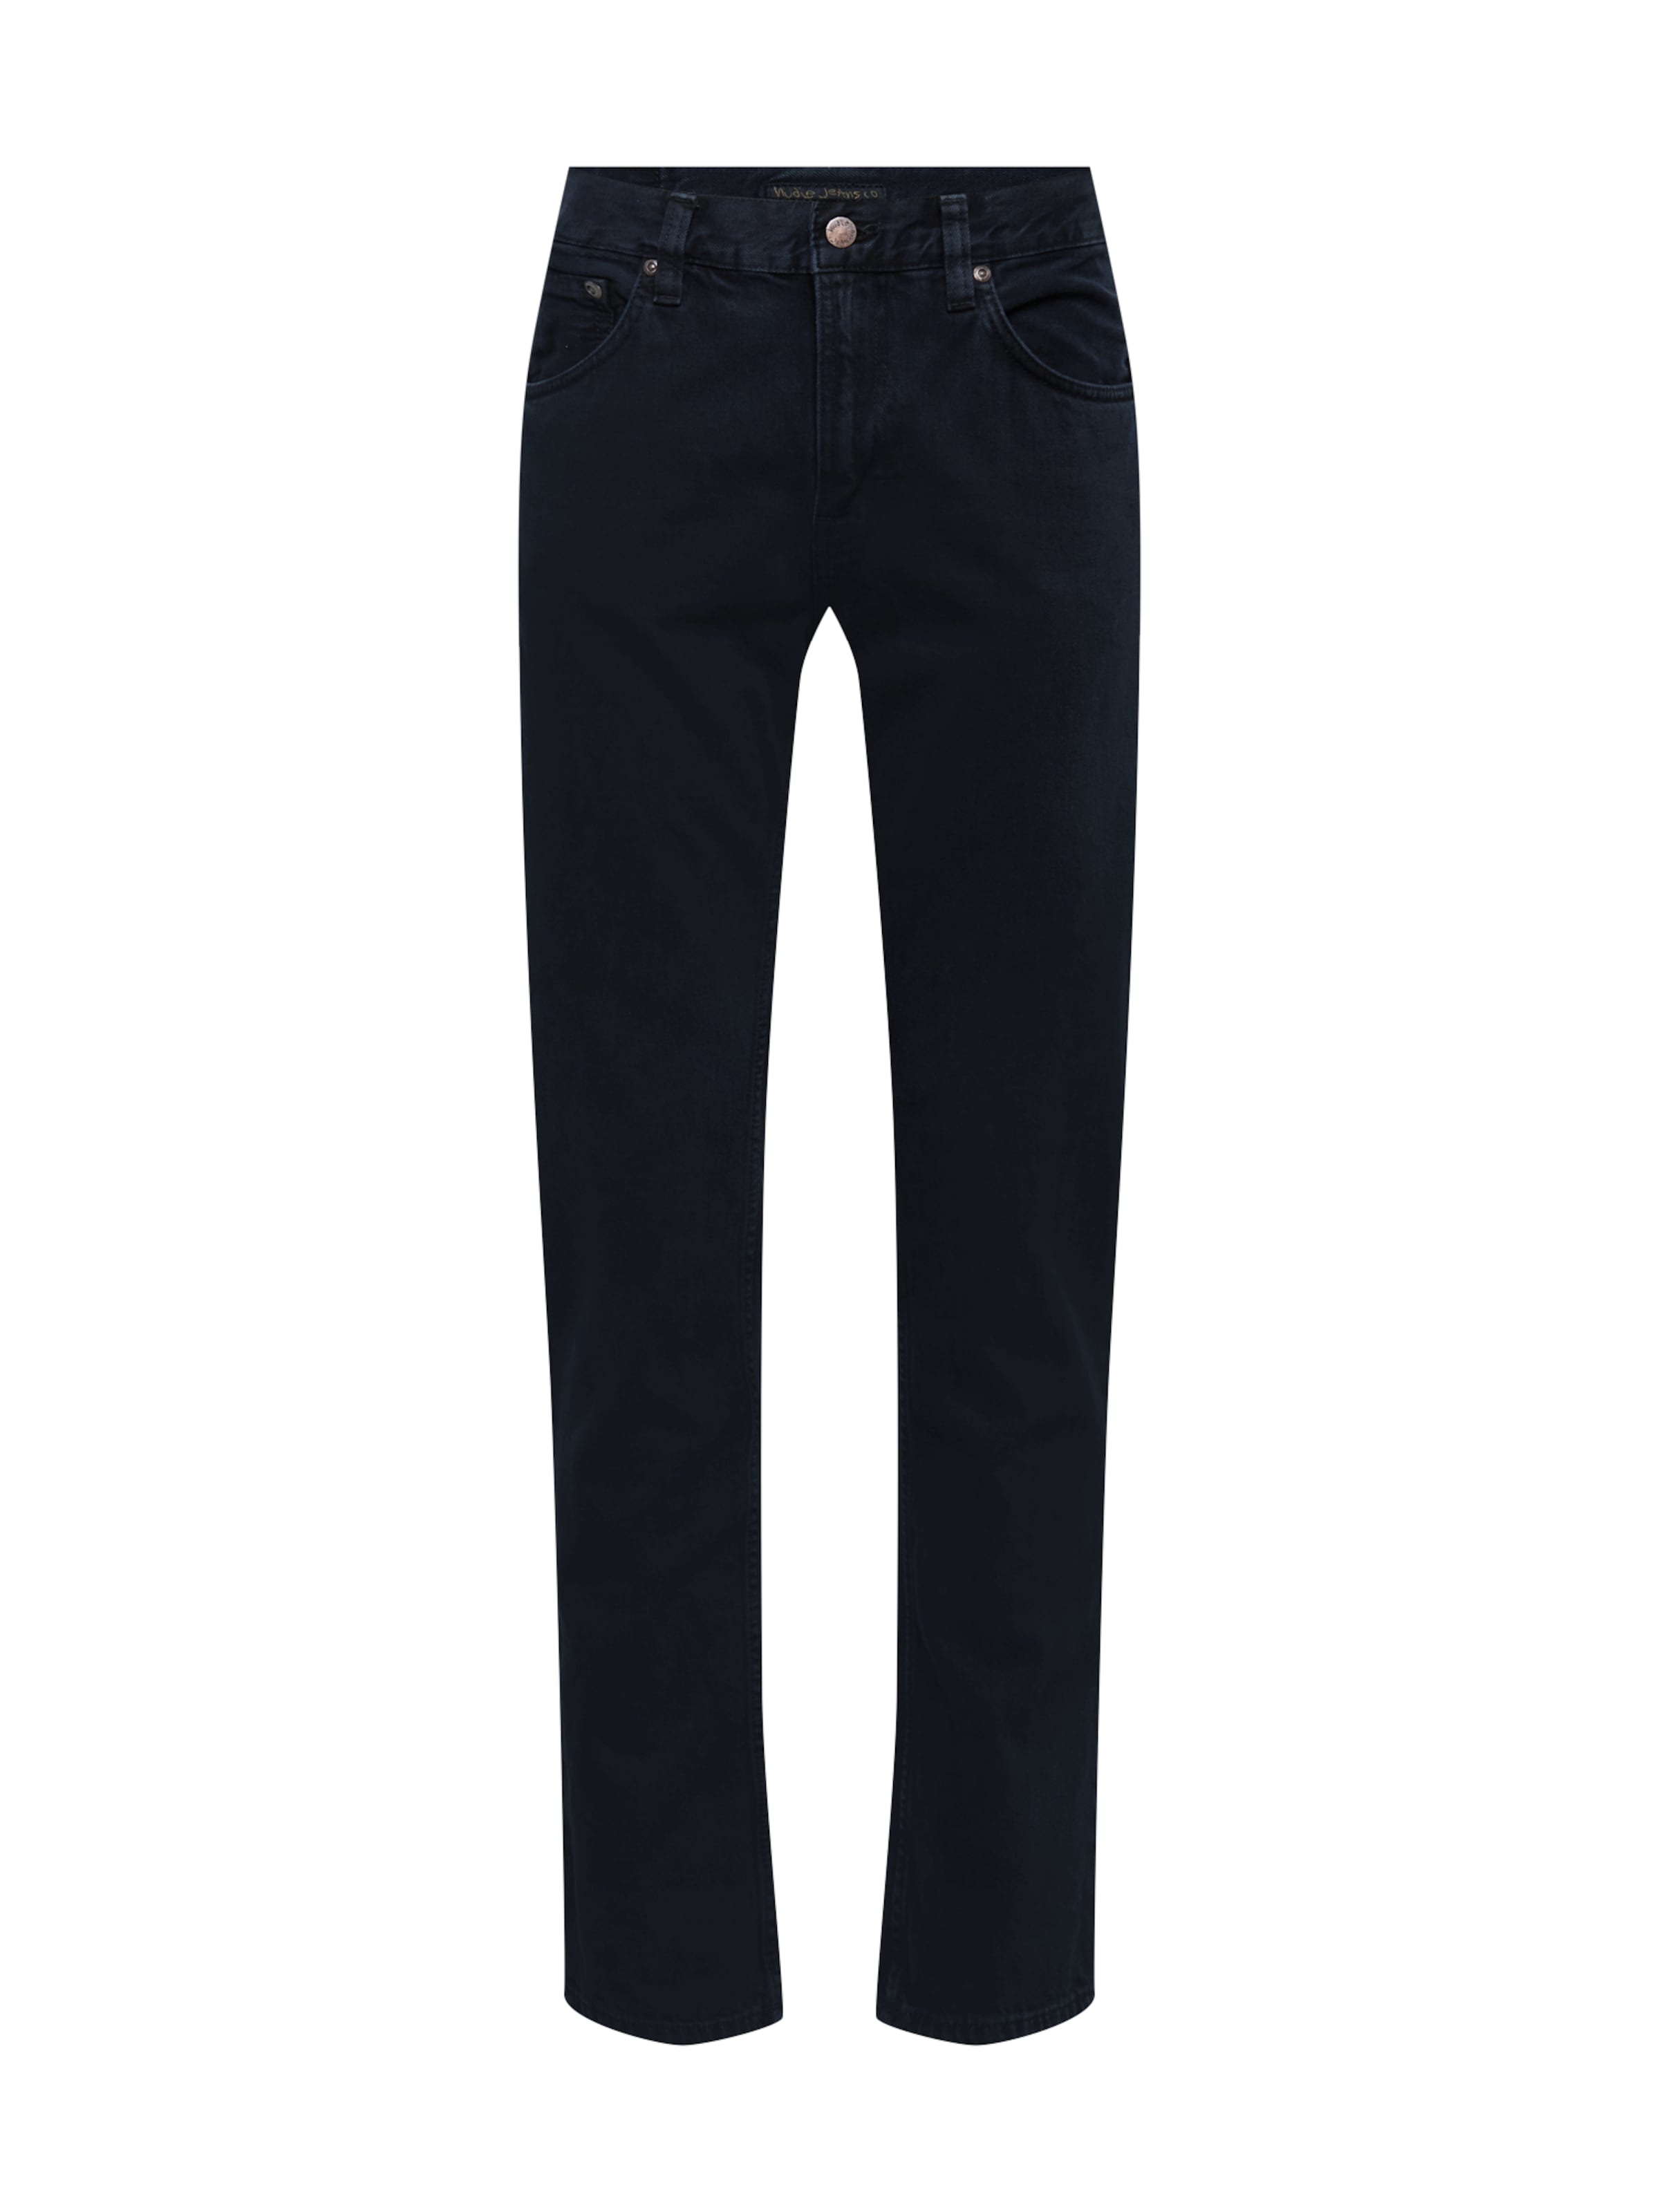 Nudie Jeans Co Jeans Gritty Jackson in Nero 